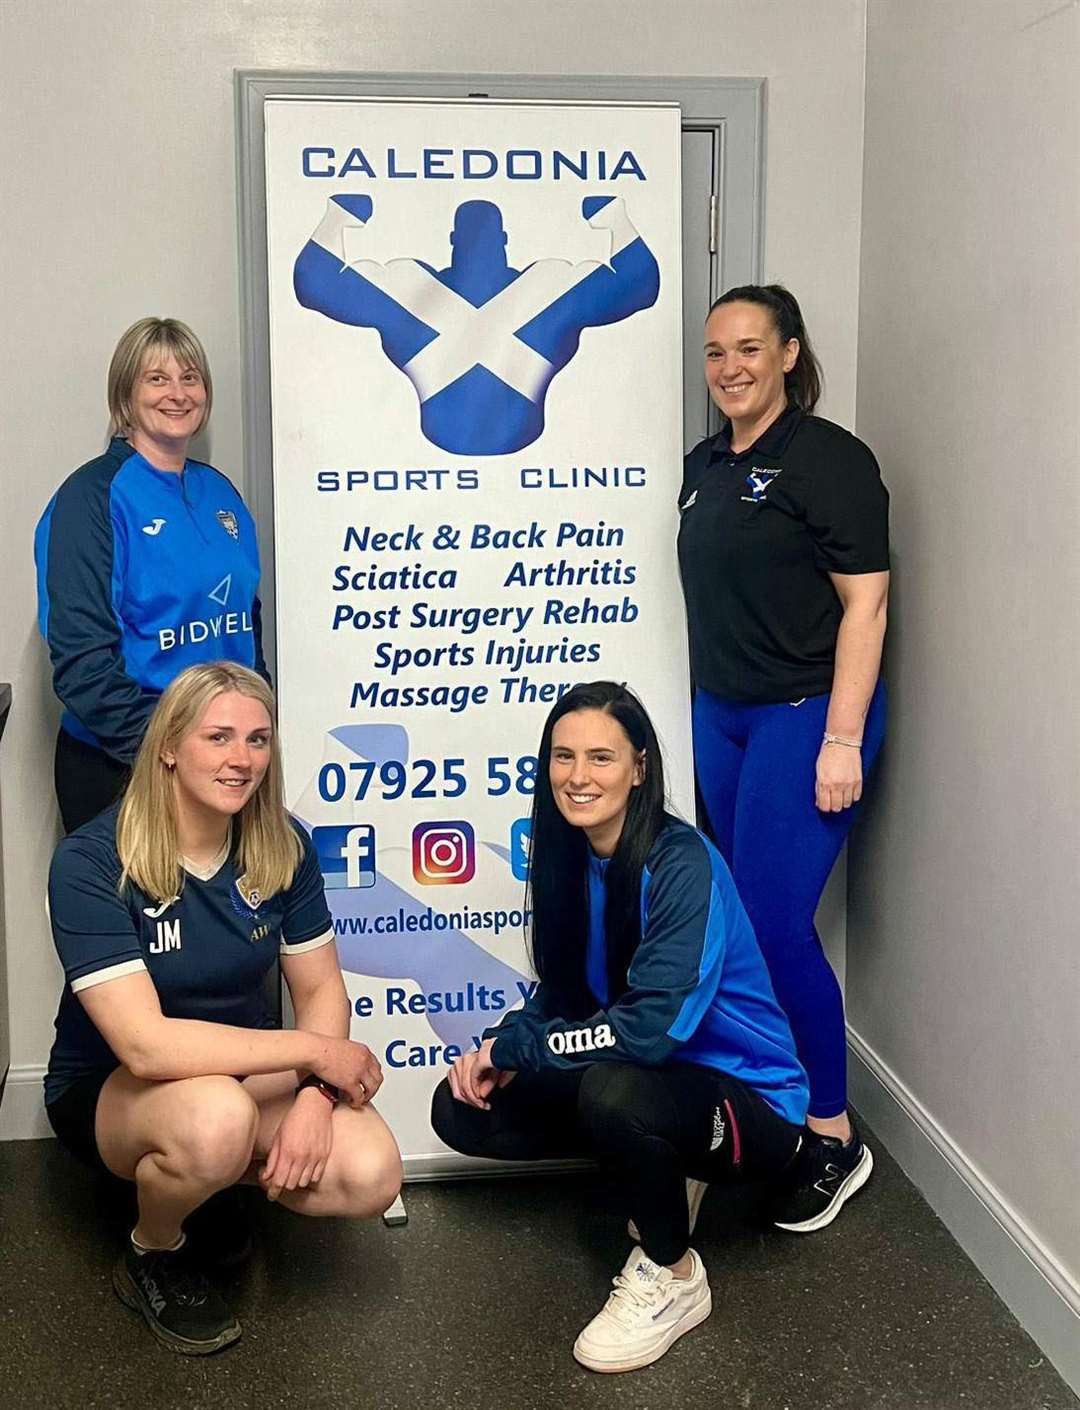 Sutherland Women's Football Club has established a link with Caledonia Sports Clinic for season-long treatment at their Invergordon base.